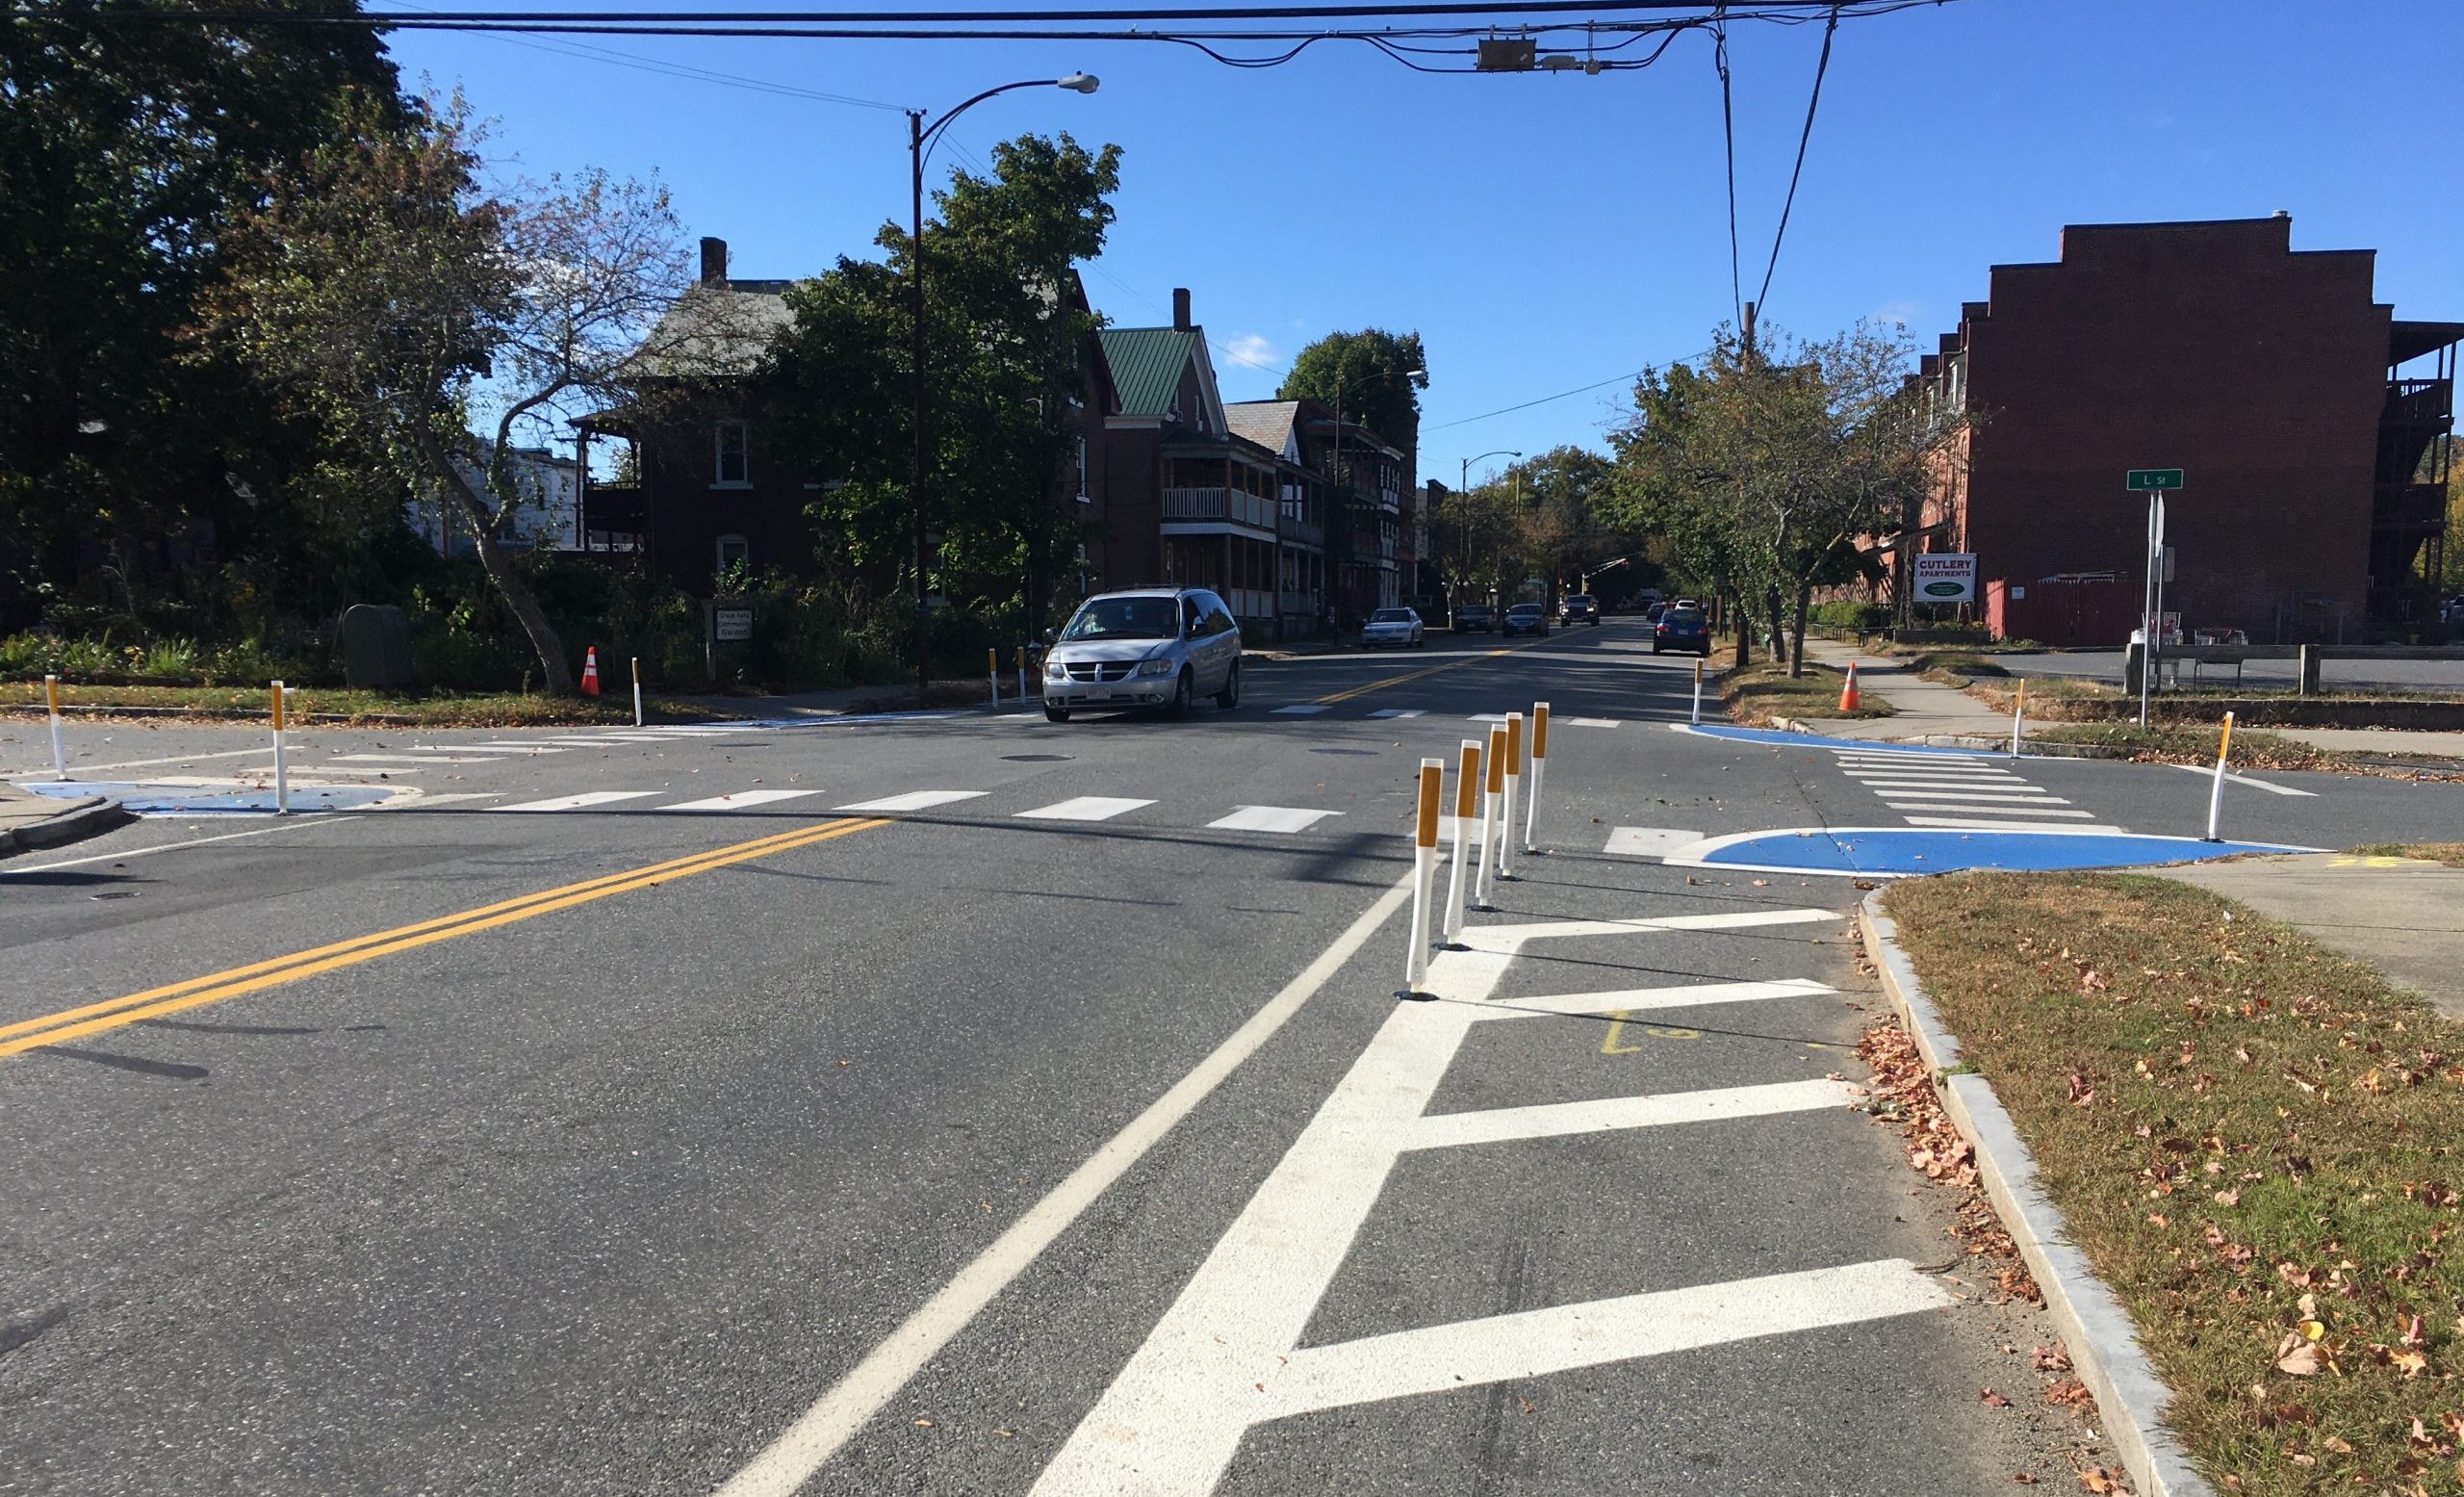 Turners Falls shared streets and spaces project in Montague, Mass.